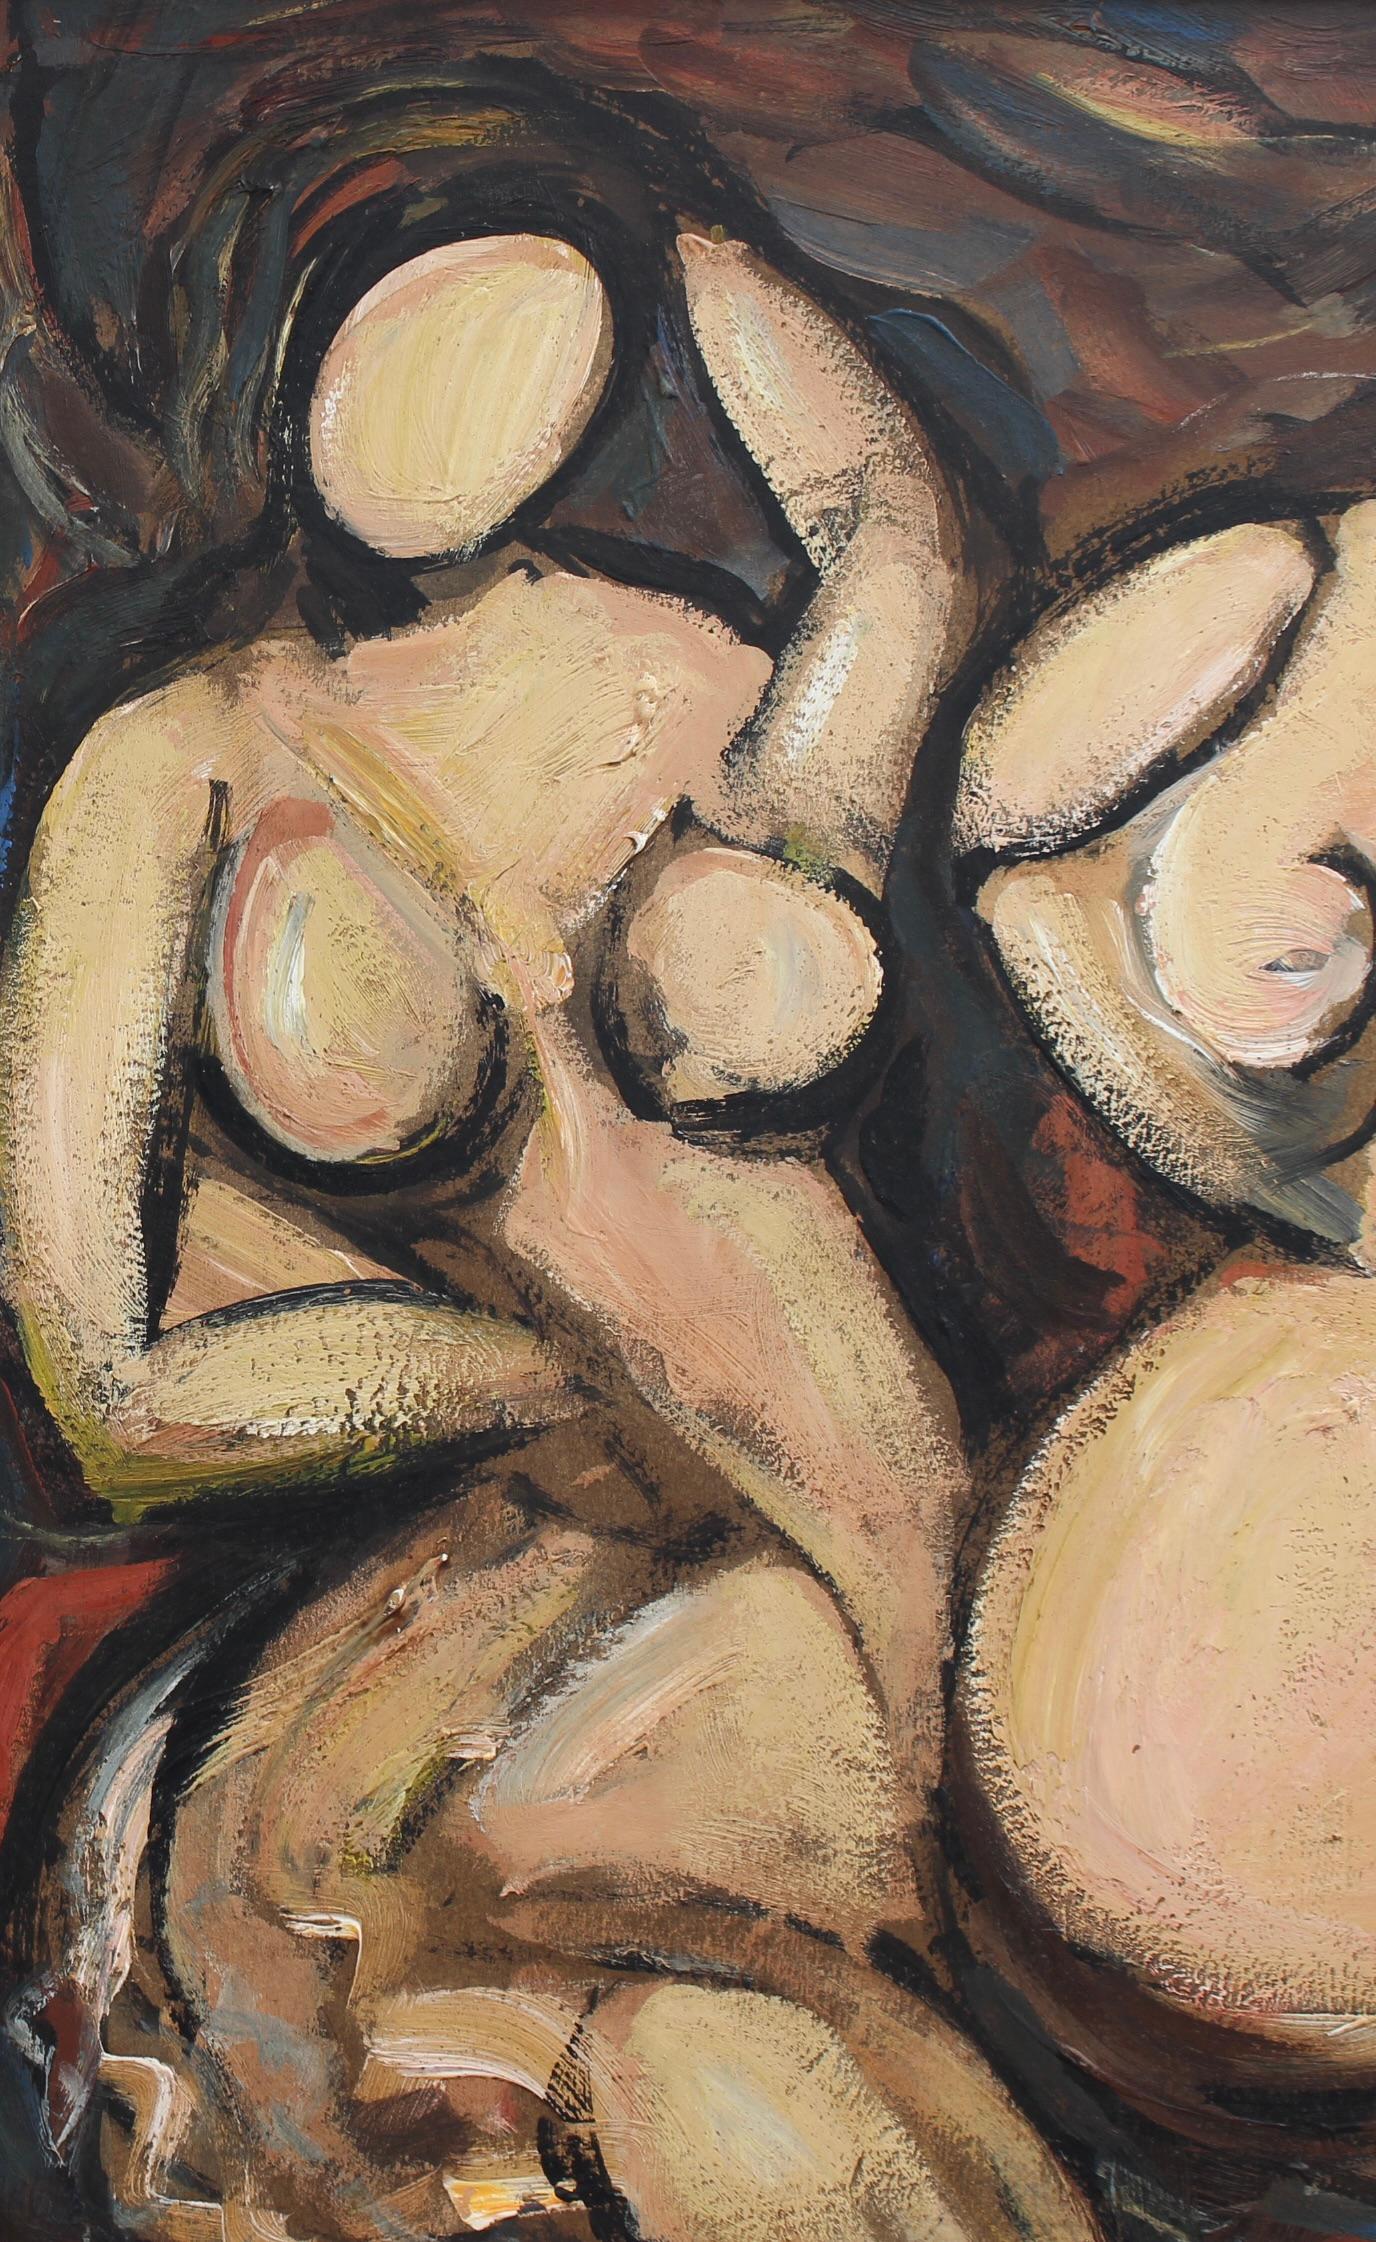 'Feminine Forms: Harmony in Curves', oil on board, German School (circa 1980s). Two nude figures portrayed in the abstract posture differently. Both are curvaceous and Rubenesque. Reposing on what appears to be a lush bed of leaves, the figures'